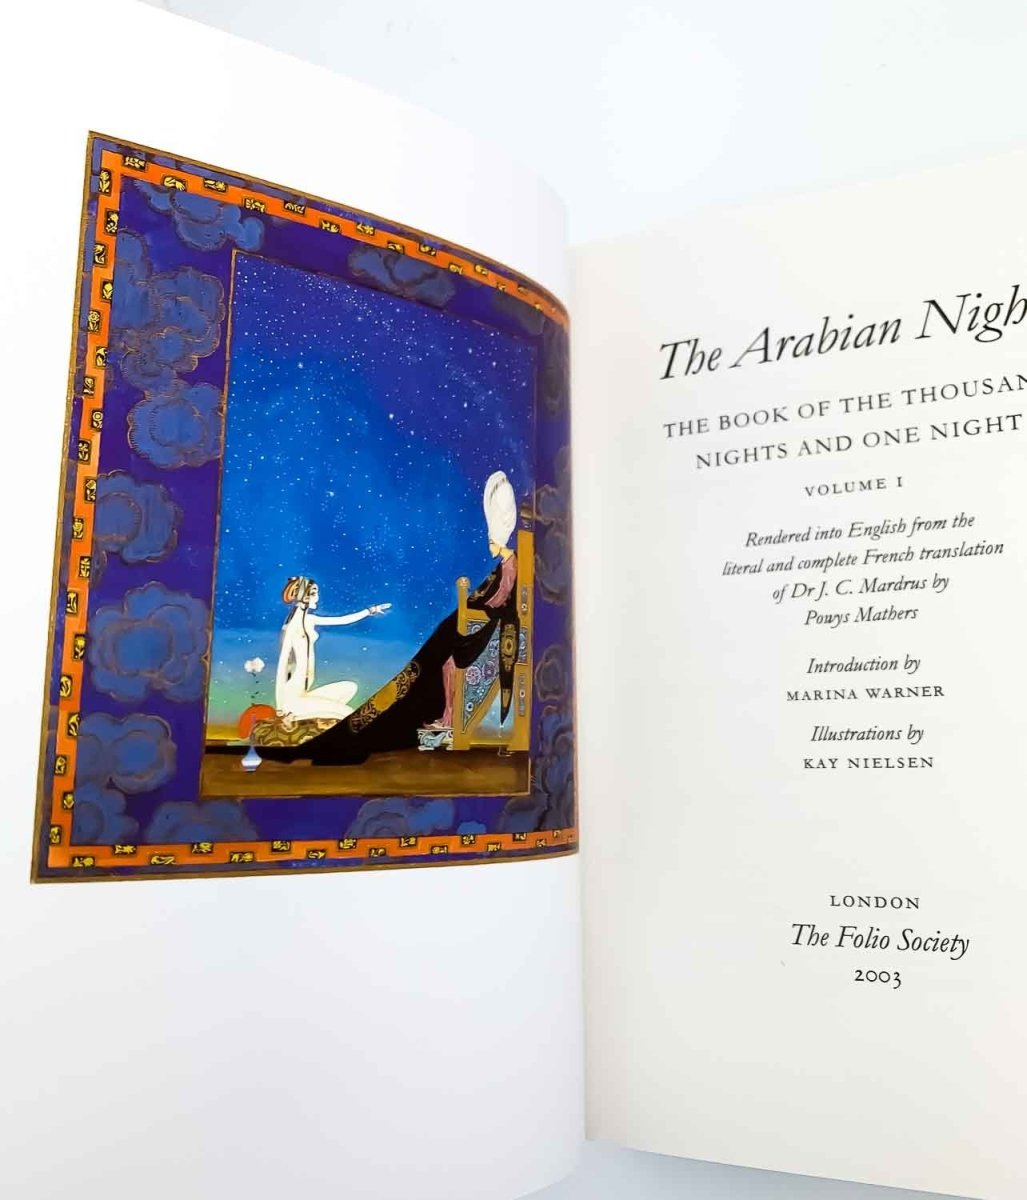 Mardrus, J C - The Arabian Nights : The Book of the Thousand Nights and One Night - 6 Volume Set | image7